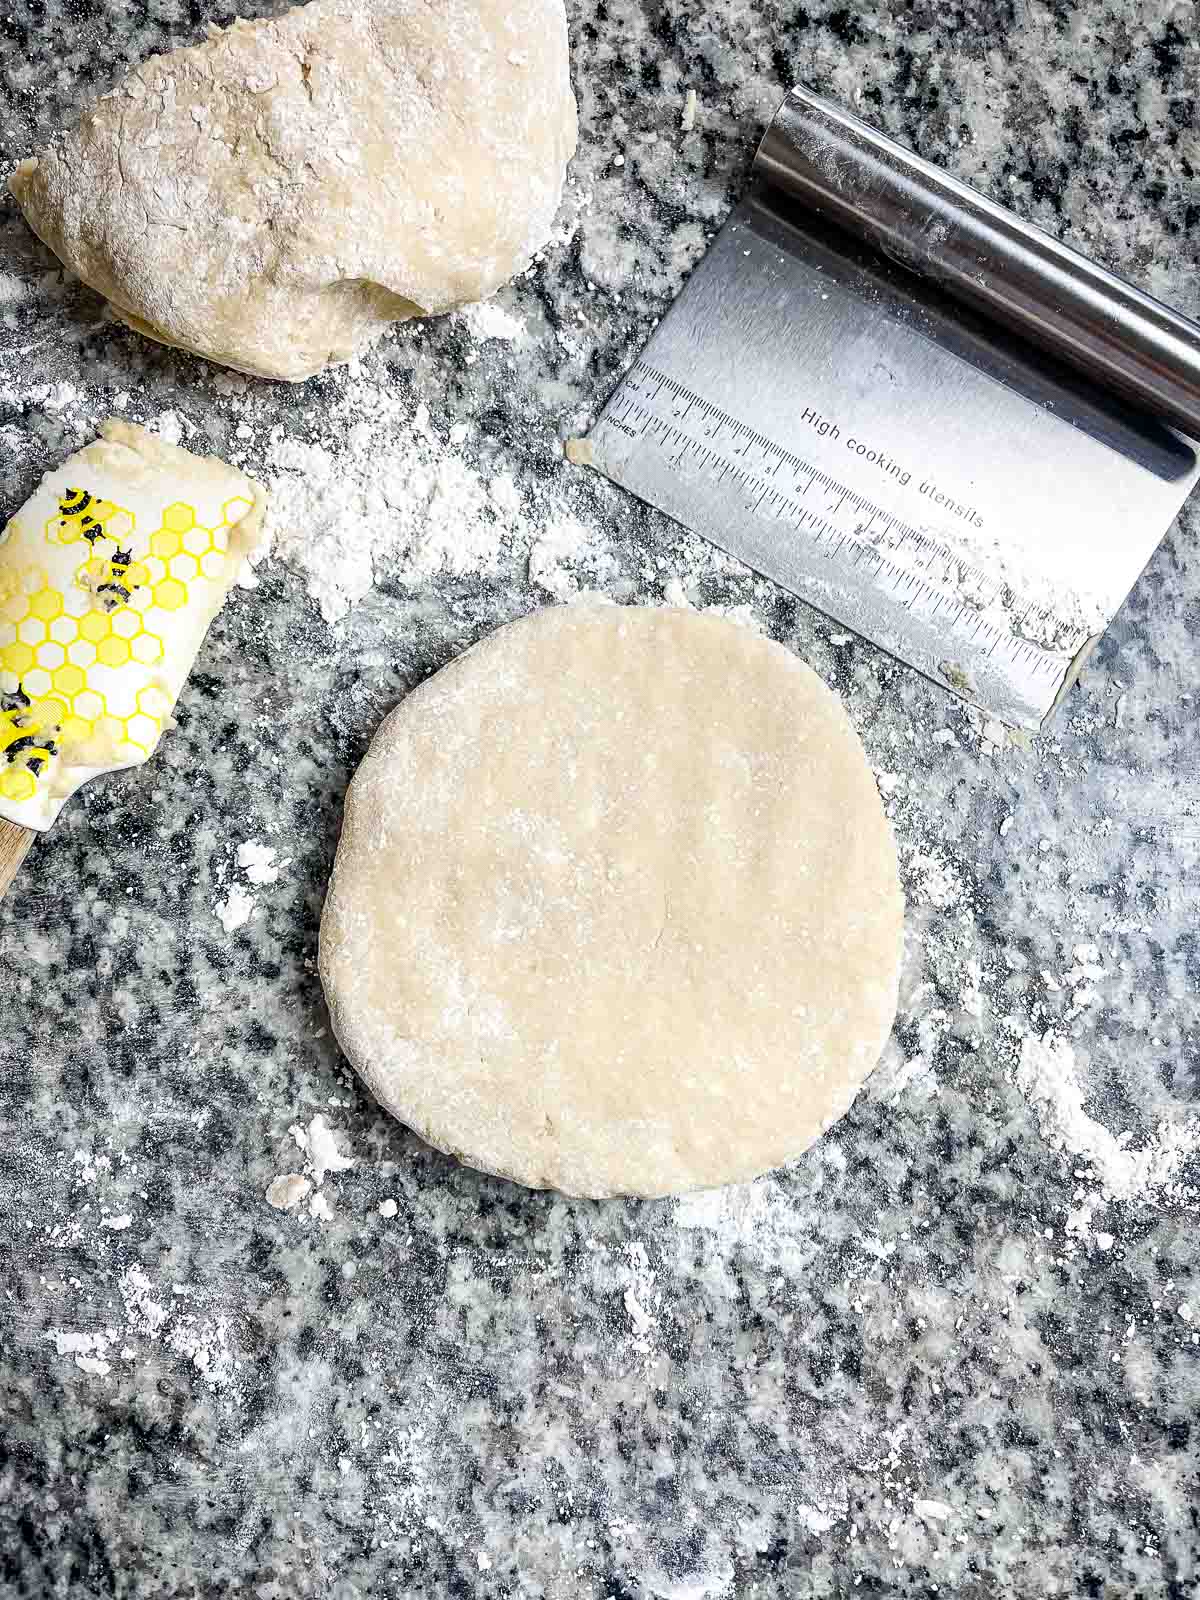 Dough on a floured surface ready to cut into triangles.